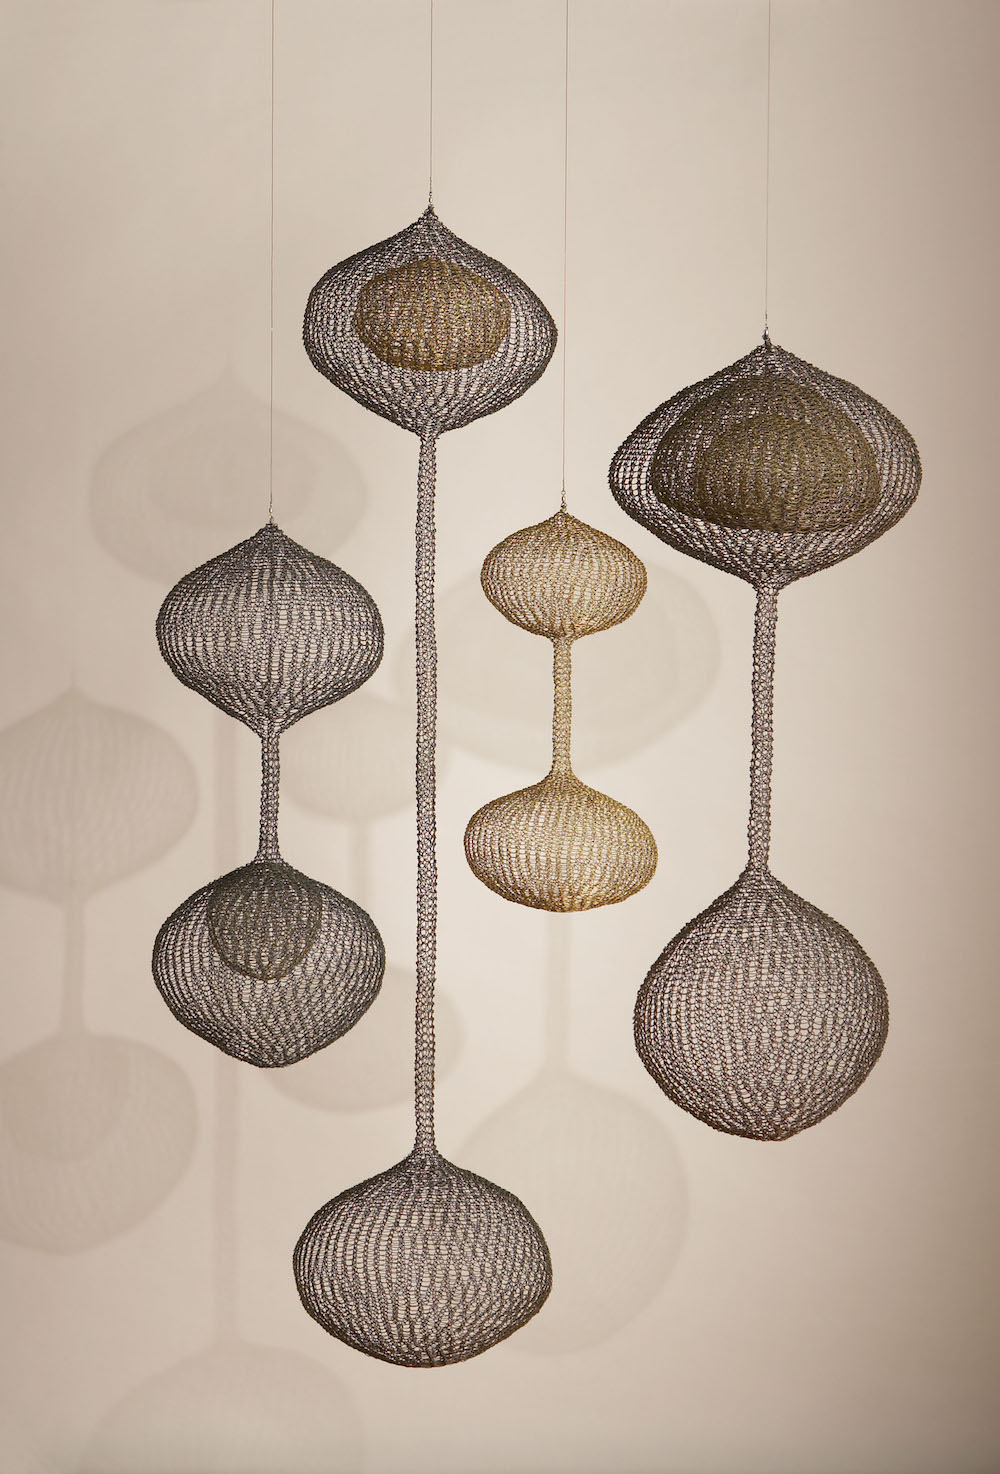 The Intricate Metal Sculptures of Ruth Asawa Wire Art